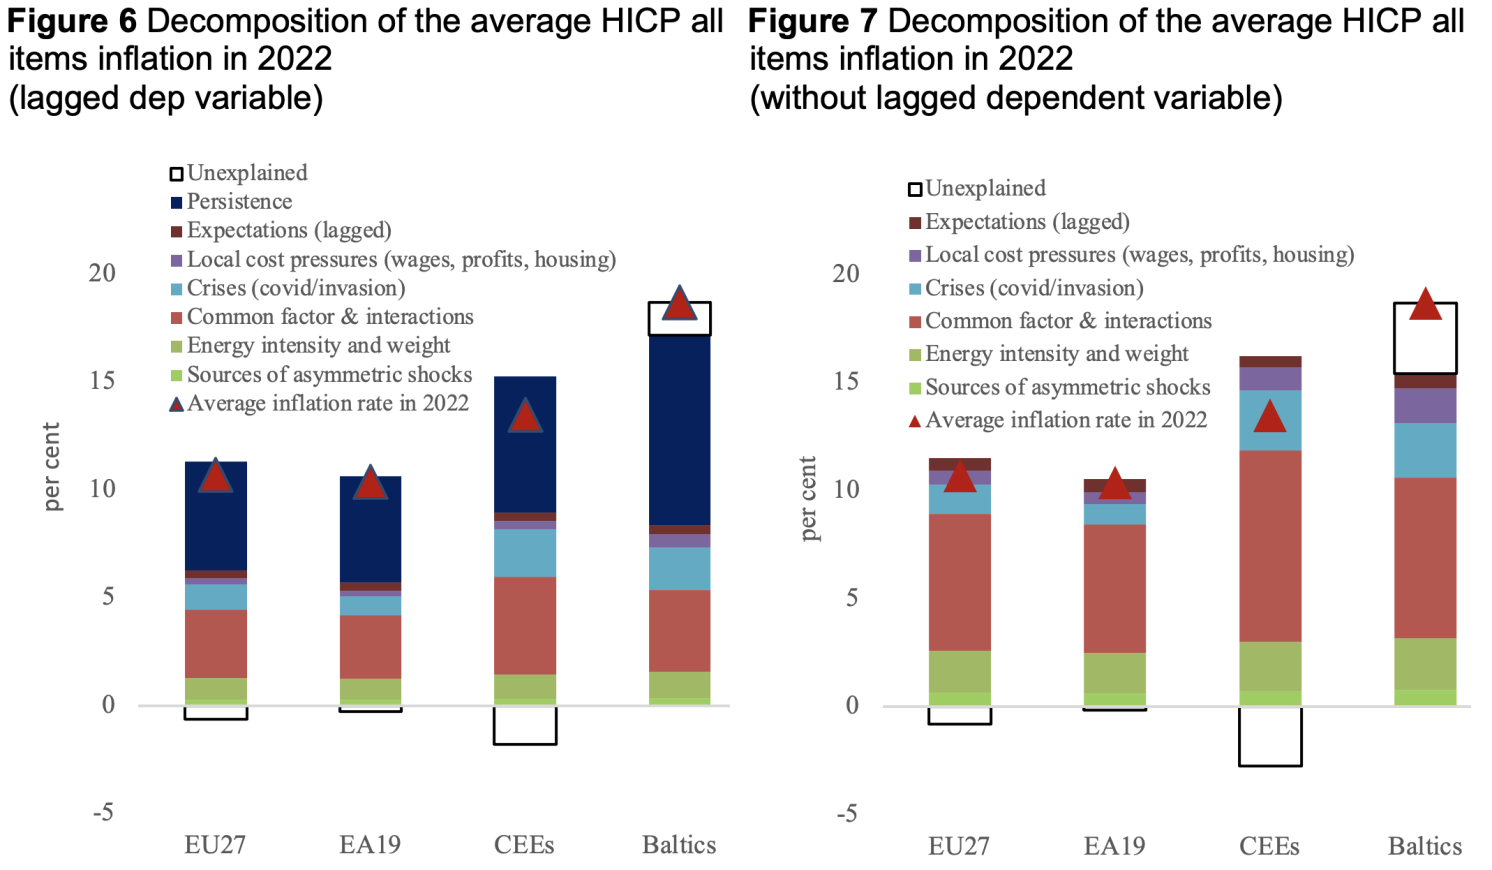 Figure 6 Decomposition of the average HICP all items inflation in 2022 (lagged dep variable) and Figure 7 Decomposition of the average HICP all items inflation in 2022 (without lagged dependent variable)